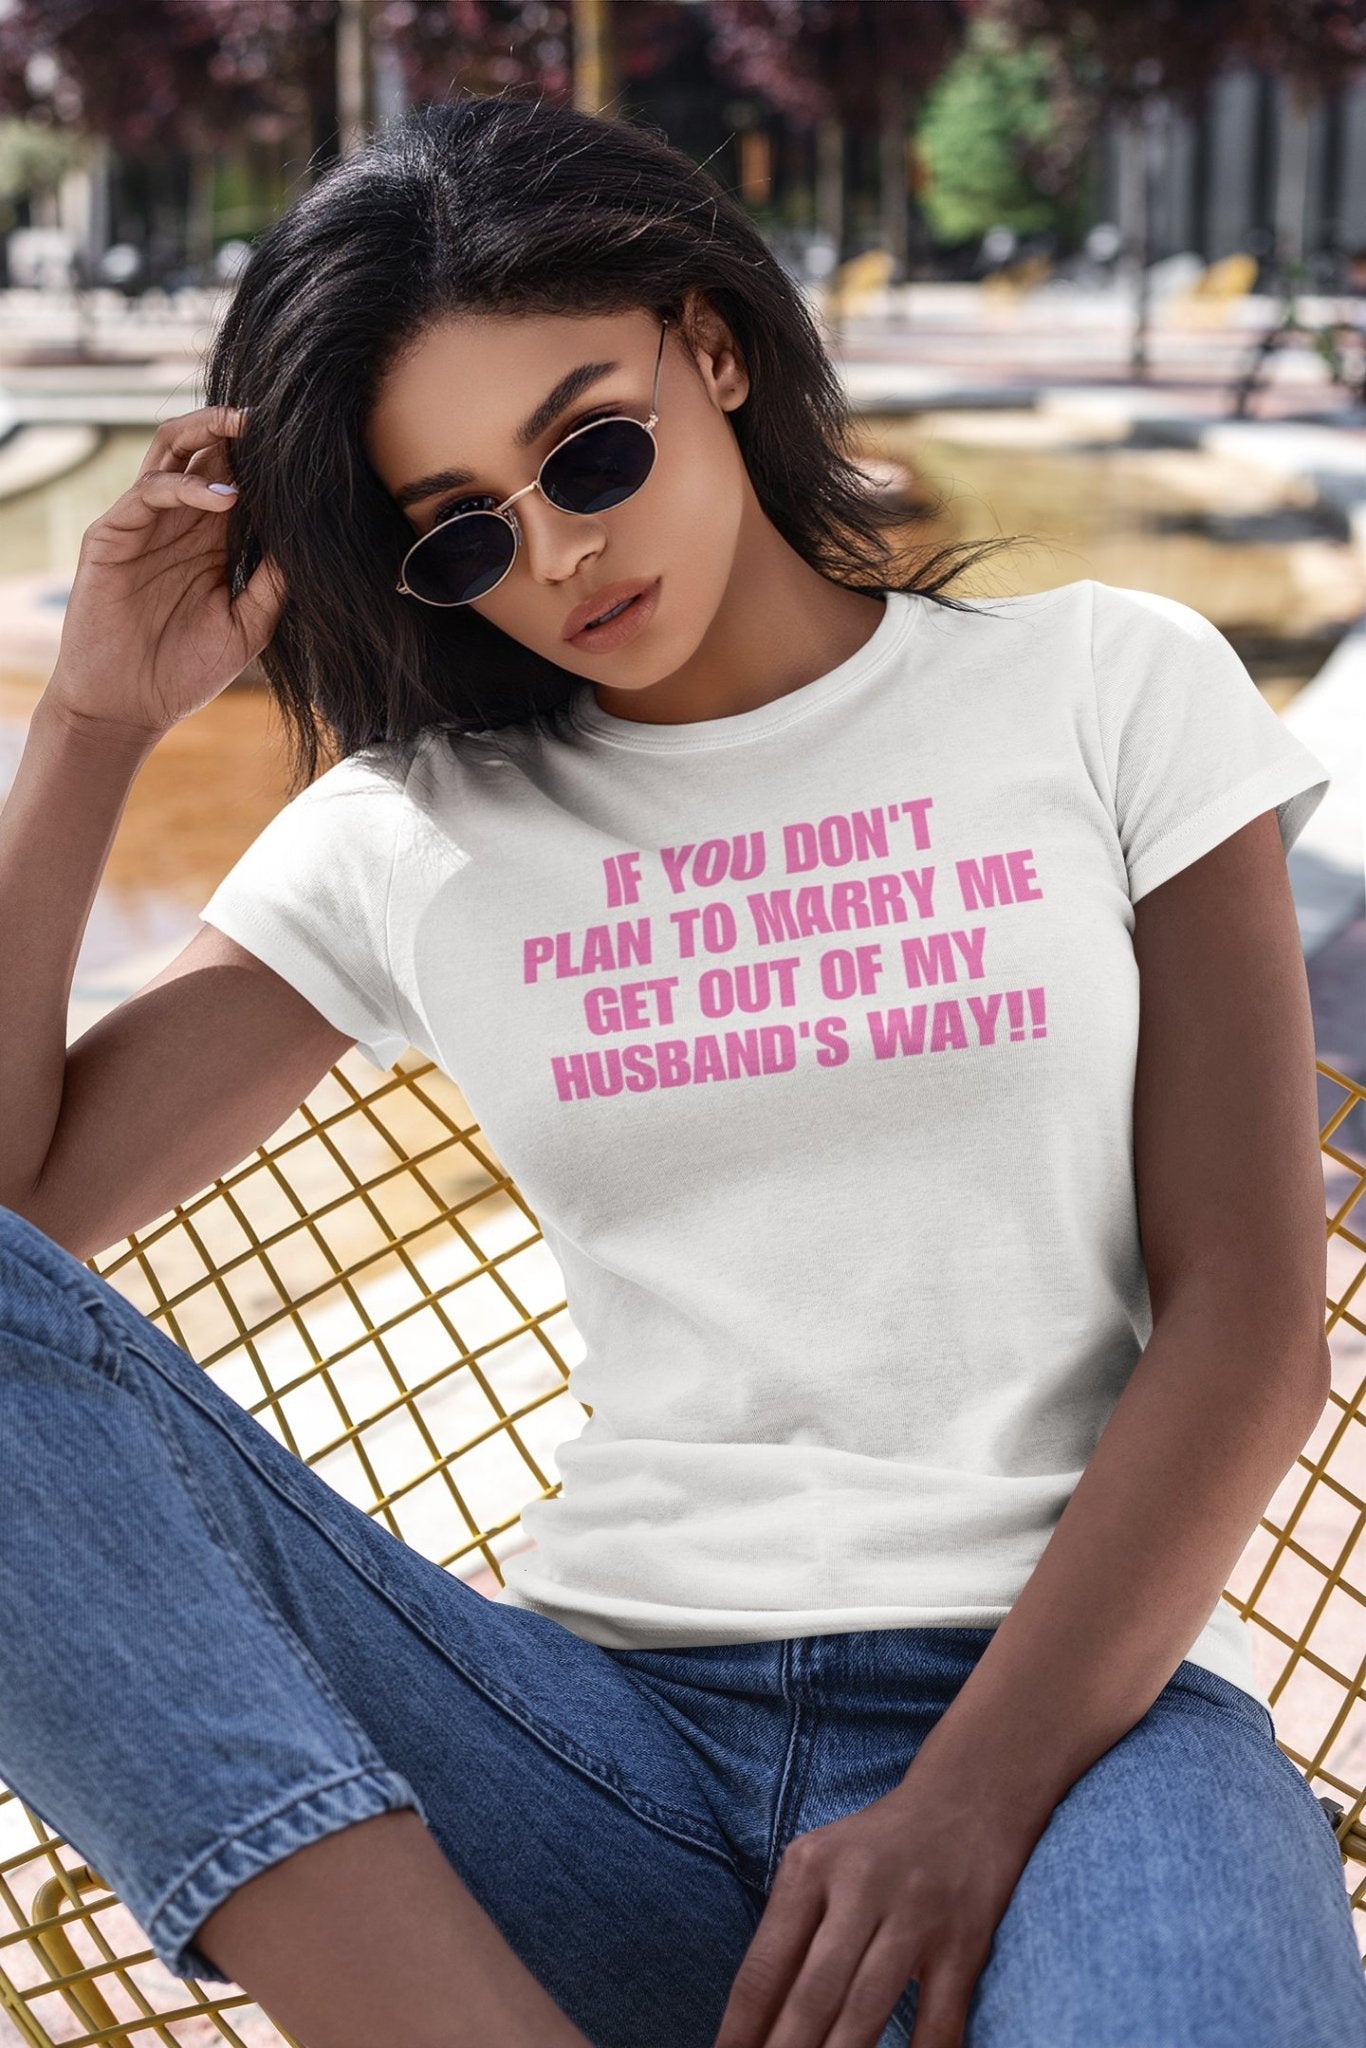 If You Don't Plan To Marry Me.. Get Out Of My Husband's Way Short-Sleeve Unisex T-Shirt | (For a Slim Fit Order a Size Down) - Catch This Tea Shirts